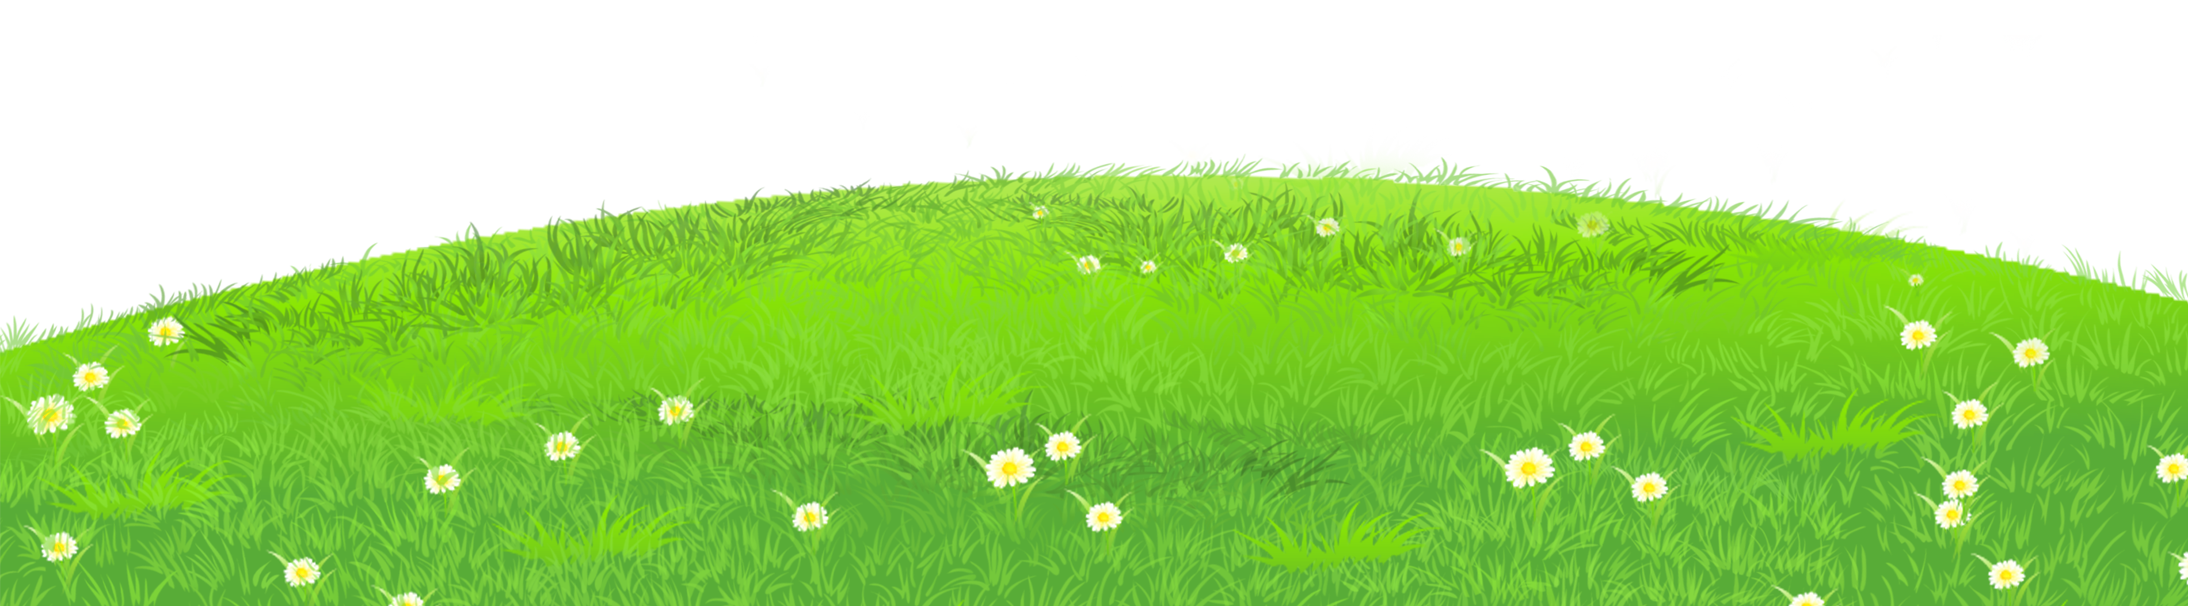 Field PNG Image